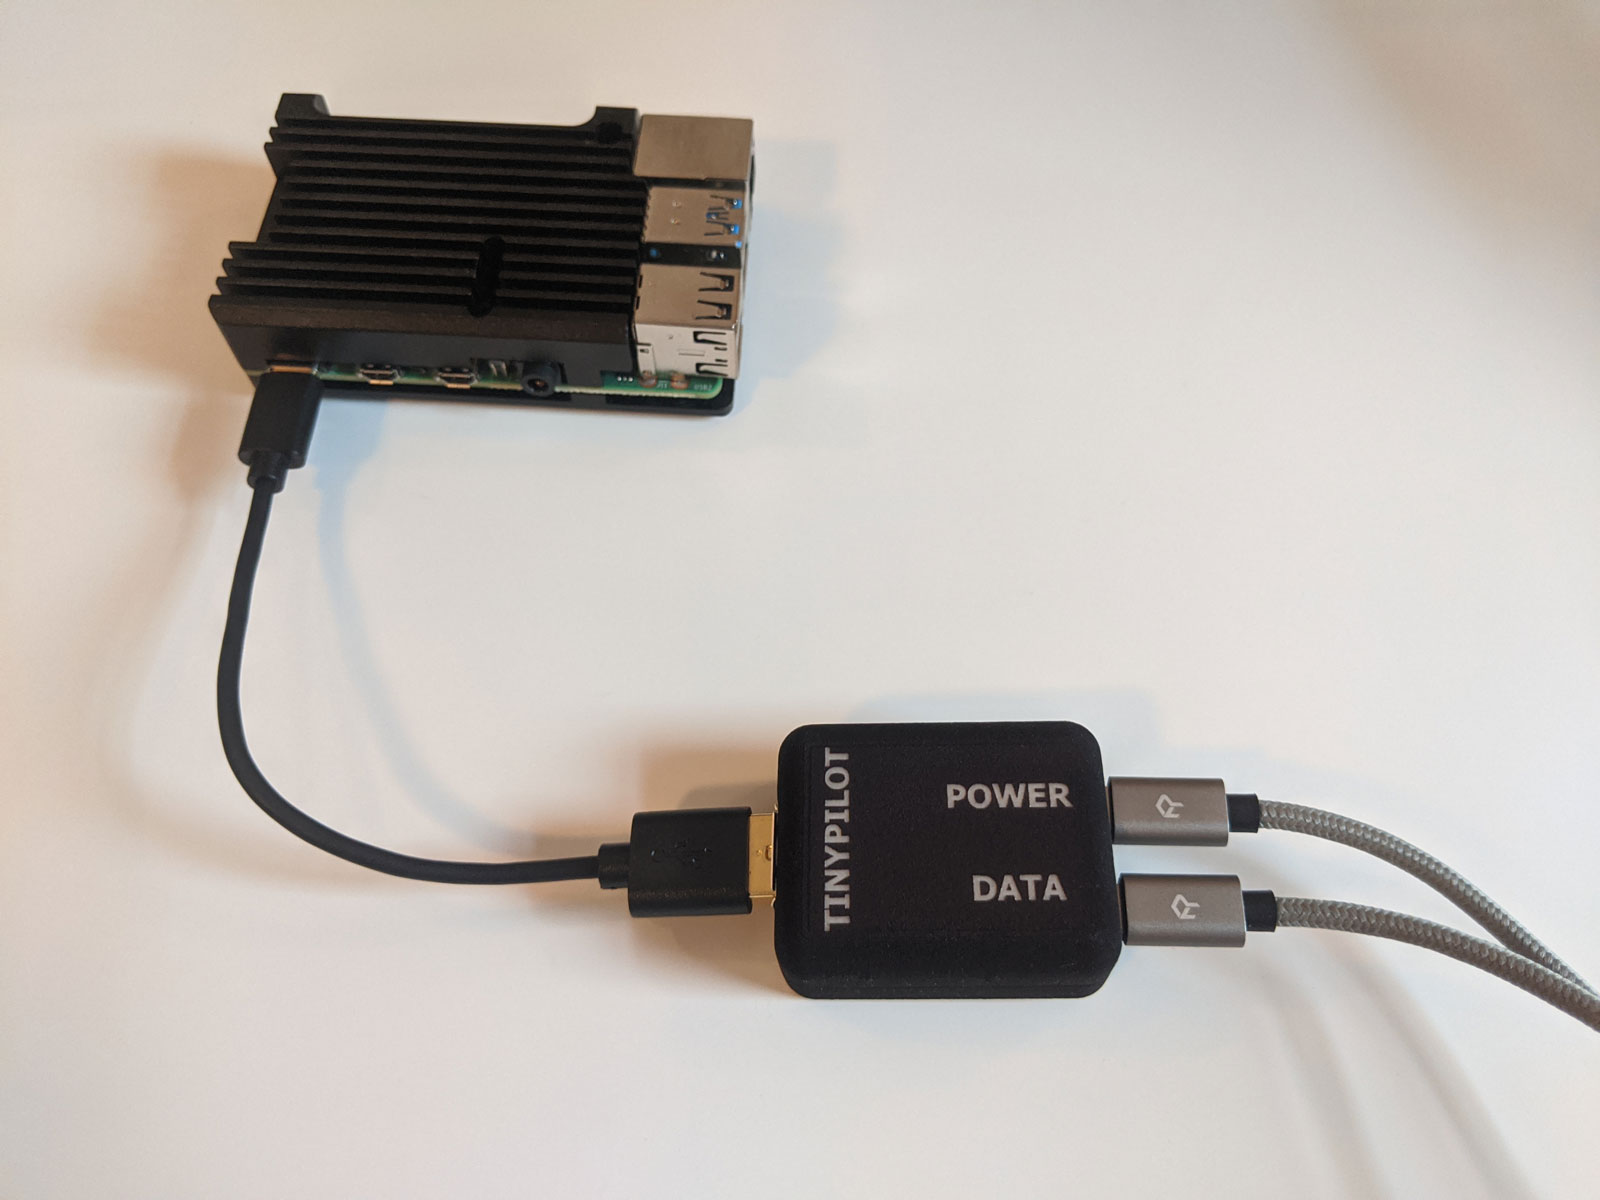 Power connector hooked up to Raspberry Pi and microUSB cables